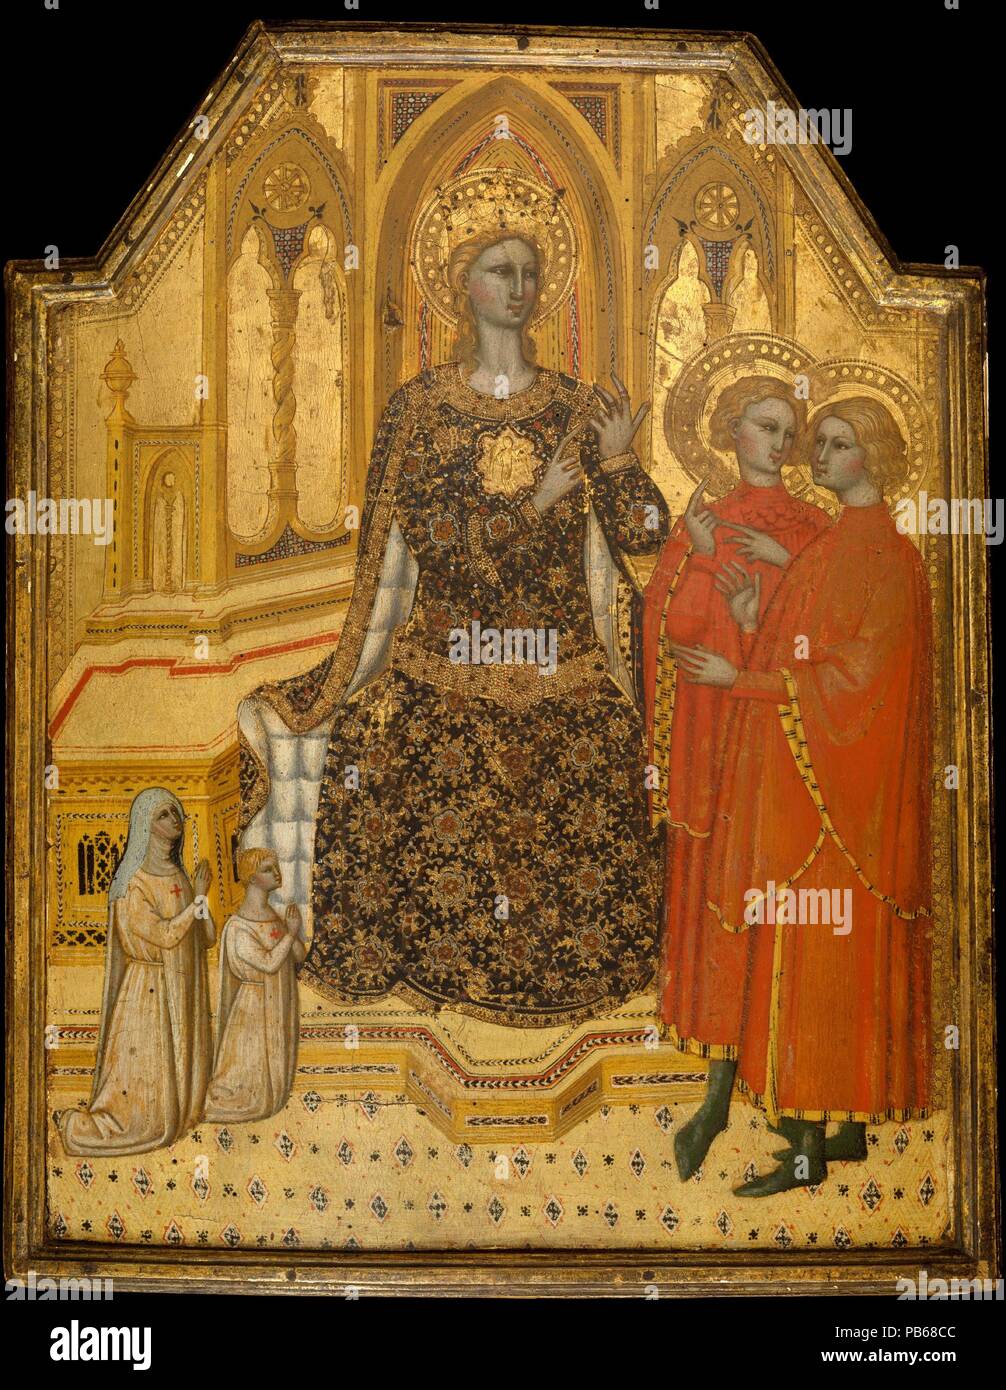 Saint Catherine Disputing and Two Donors. Artist: Cenni di Francesco di Ser Cenni (Italian, Florence, active by 1369-died 1415). Dimensions: Overall, with engaged frame, 22 3/4 x 18 1/4 in. (57.8 x 46.4 cm); painted surface 21 1/4 x 16 3/4 in. (54 x 42.5 cm). Date: possibly ca. 1380.  A princess of great learning and beauty, Saint Catherine of Alexandria (fourth century) was challenged to a debate with fifty pagan orators, all of whom she converted to Christianity. Here she counts off the points of her dispute to two men who wear haloes as an indication of their conversion by her arguments (an Stock Photo